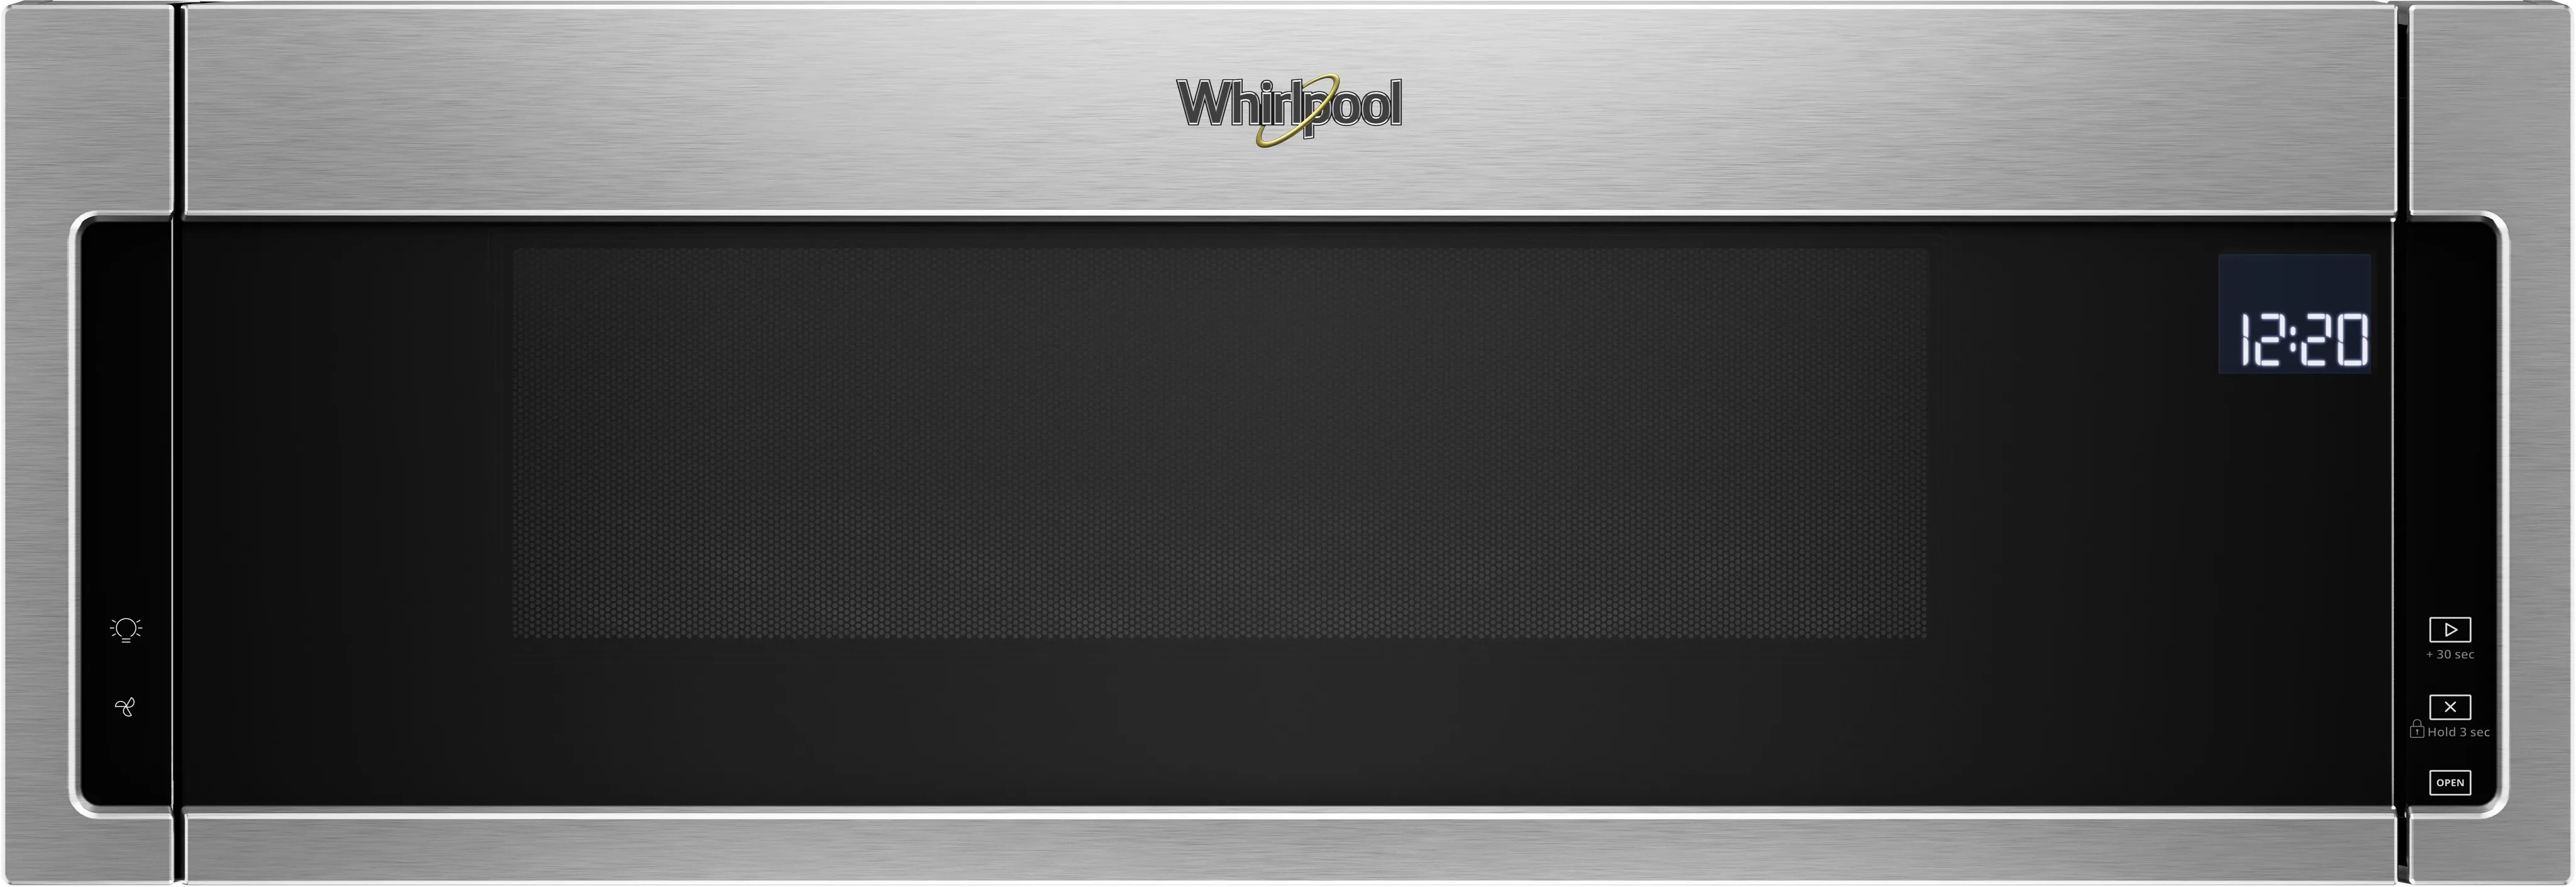 Front view of the Whirlpool WML75011HZ over the range microwave 